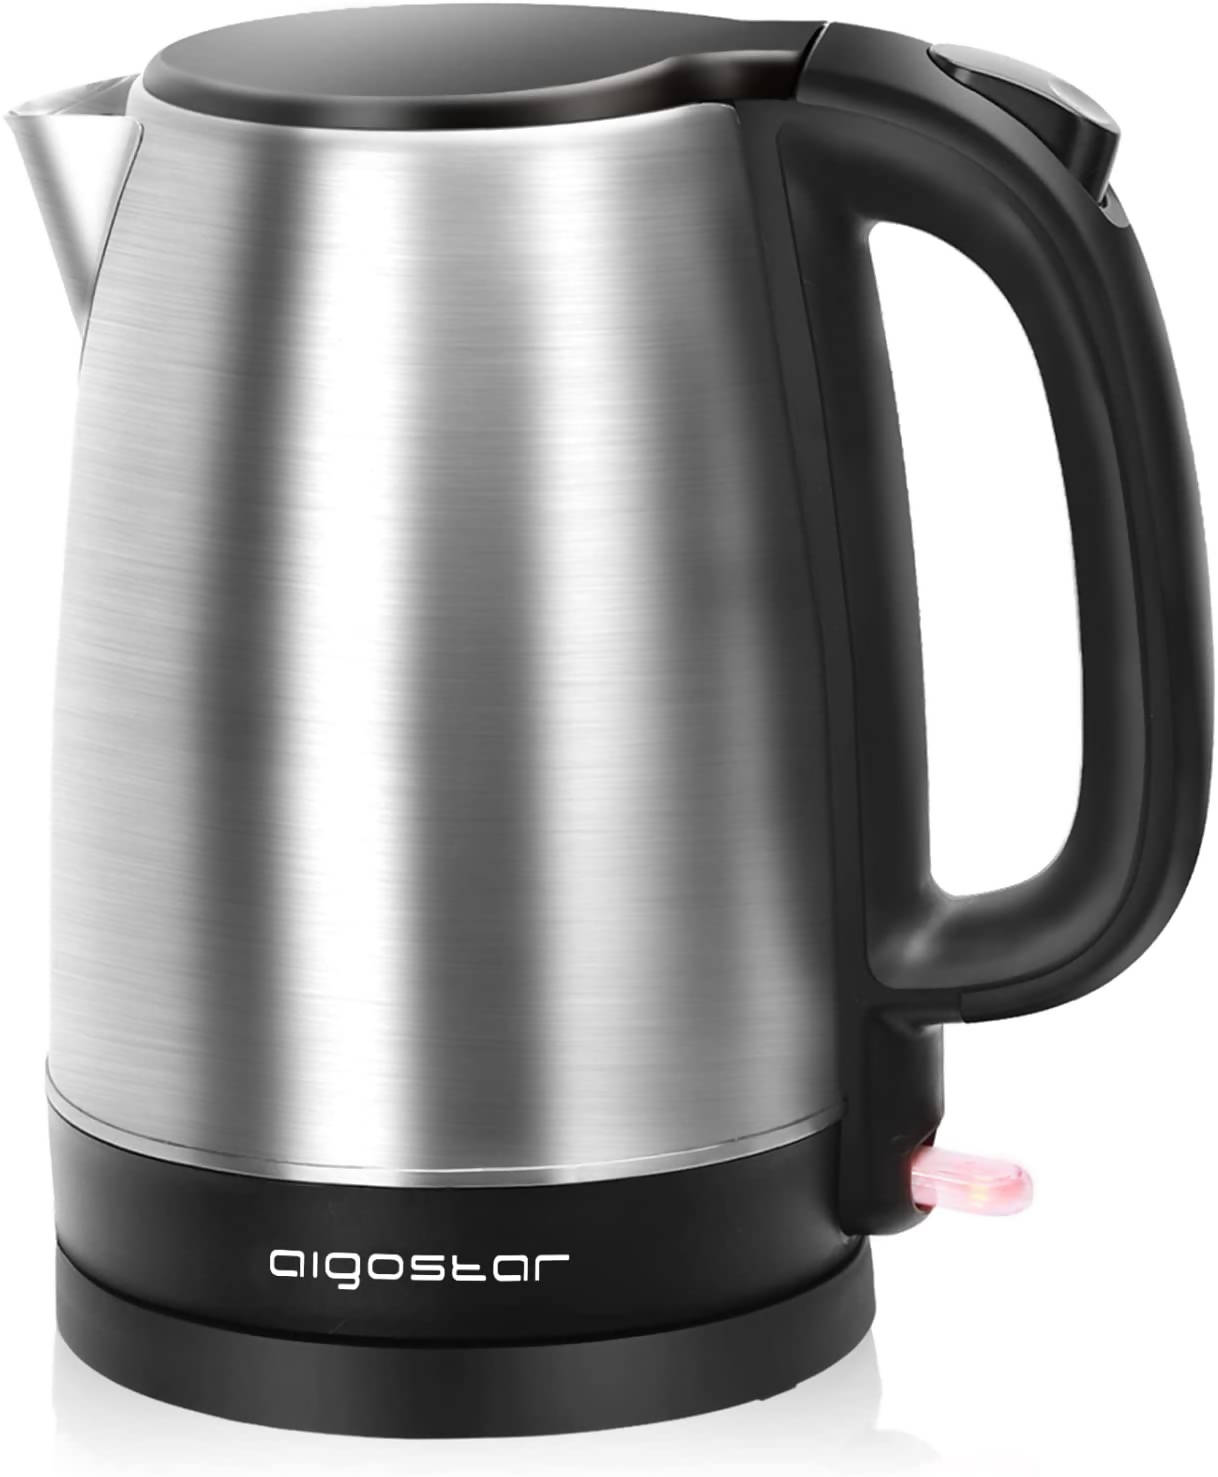 Aigostar Kettle Stainless Steel 1.7 L, 2200 W Electric Kettle with Limescale Filter, Wireless, Automatic Shut-Off, Ideal for Tea, Coffee, Baby Food, BPA Free, Black